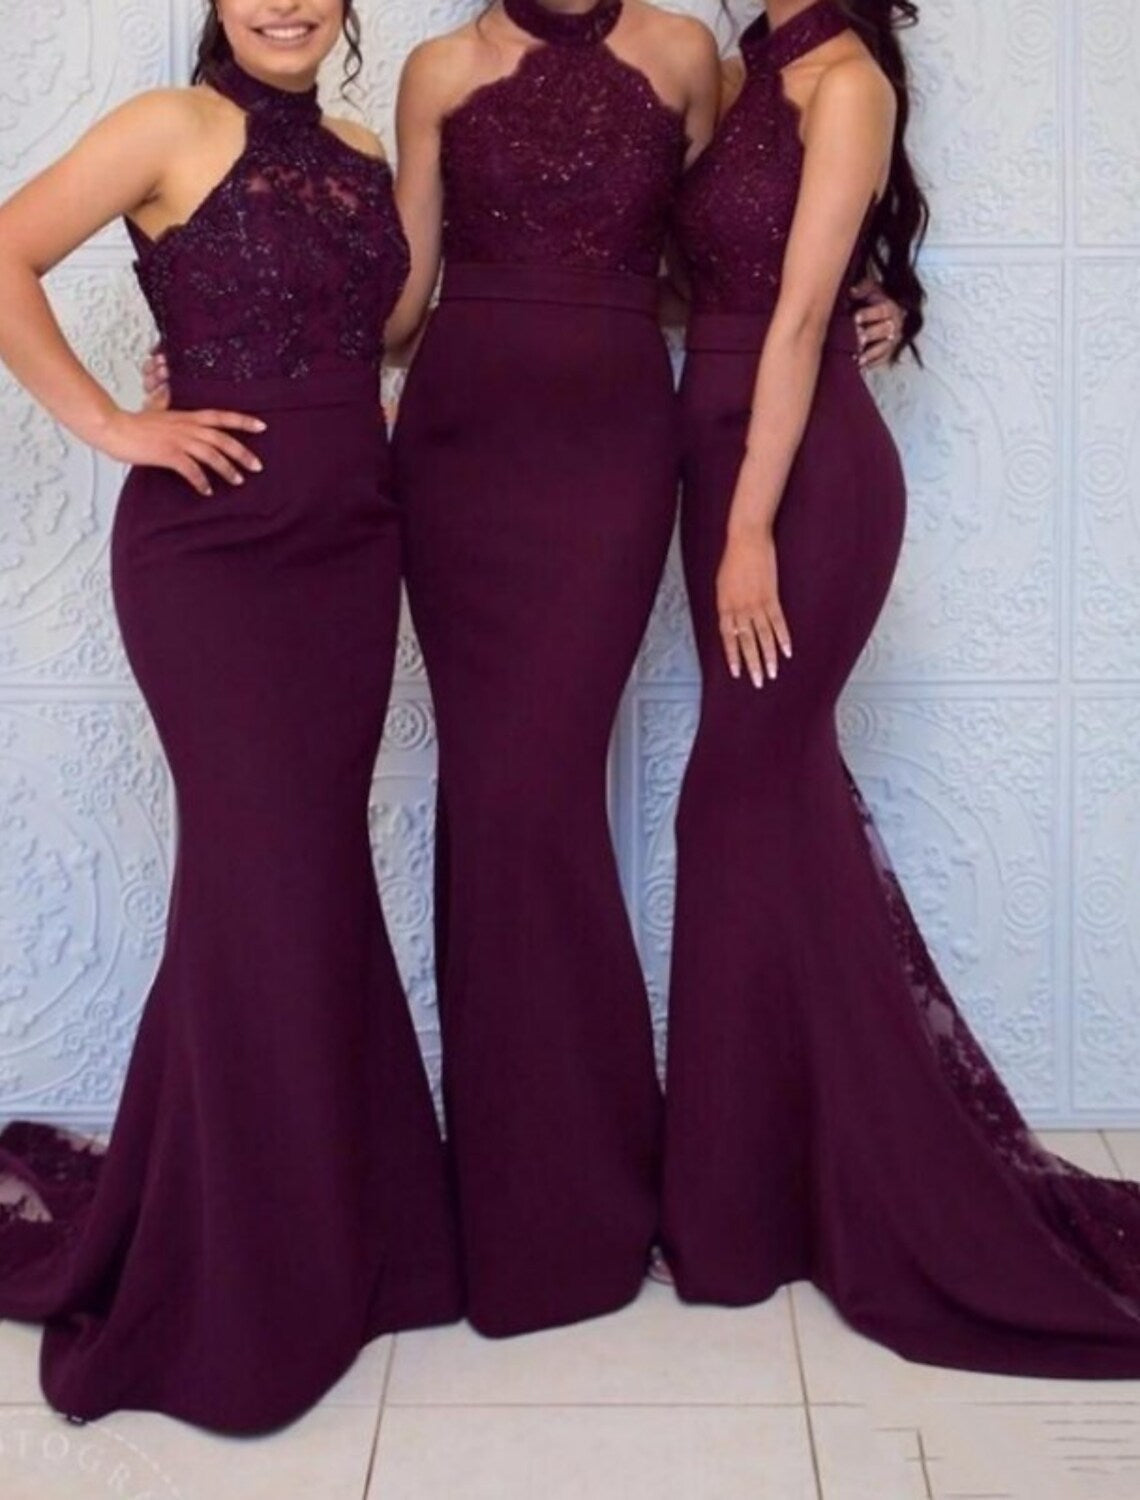 Mermaid / Trumpet Bridesmaid Dress Halter Neck Sleeveless Elegant Court Train Chiffon / Lace with Sequin / Solid Color